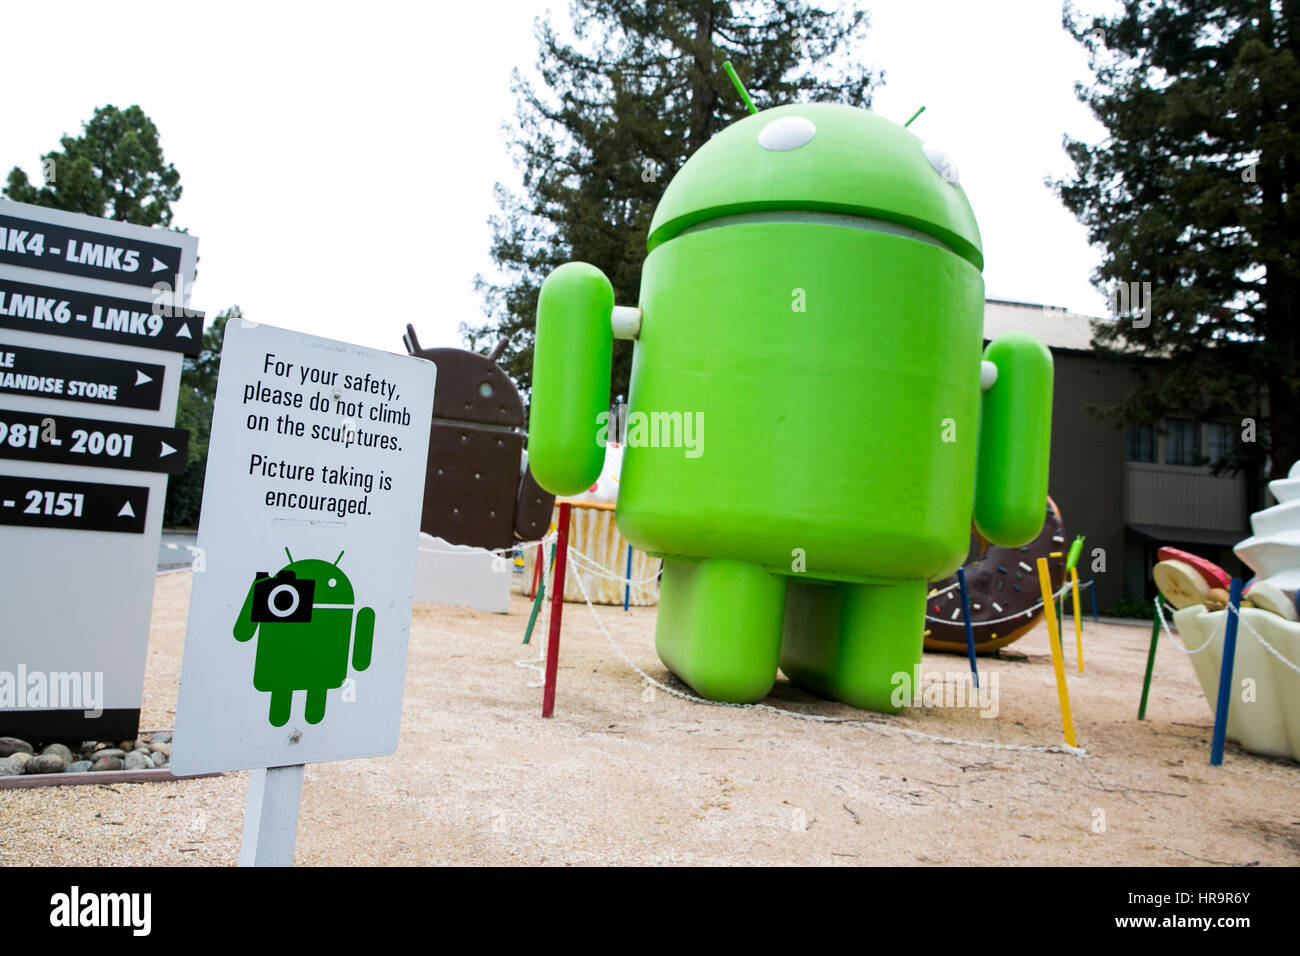 A garden full of Google Android operating system statues in Mountain View, California, on February 18, 2017. Stock Photo